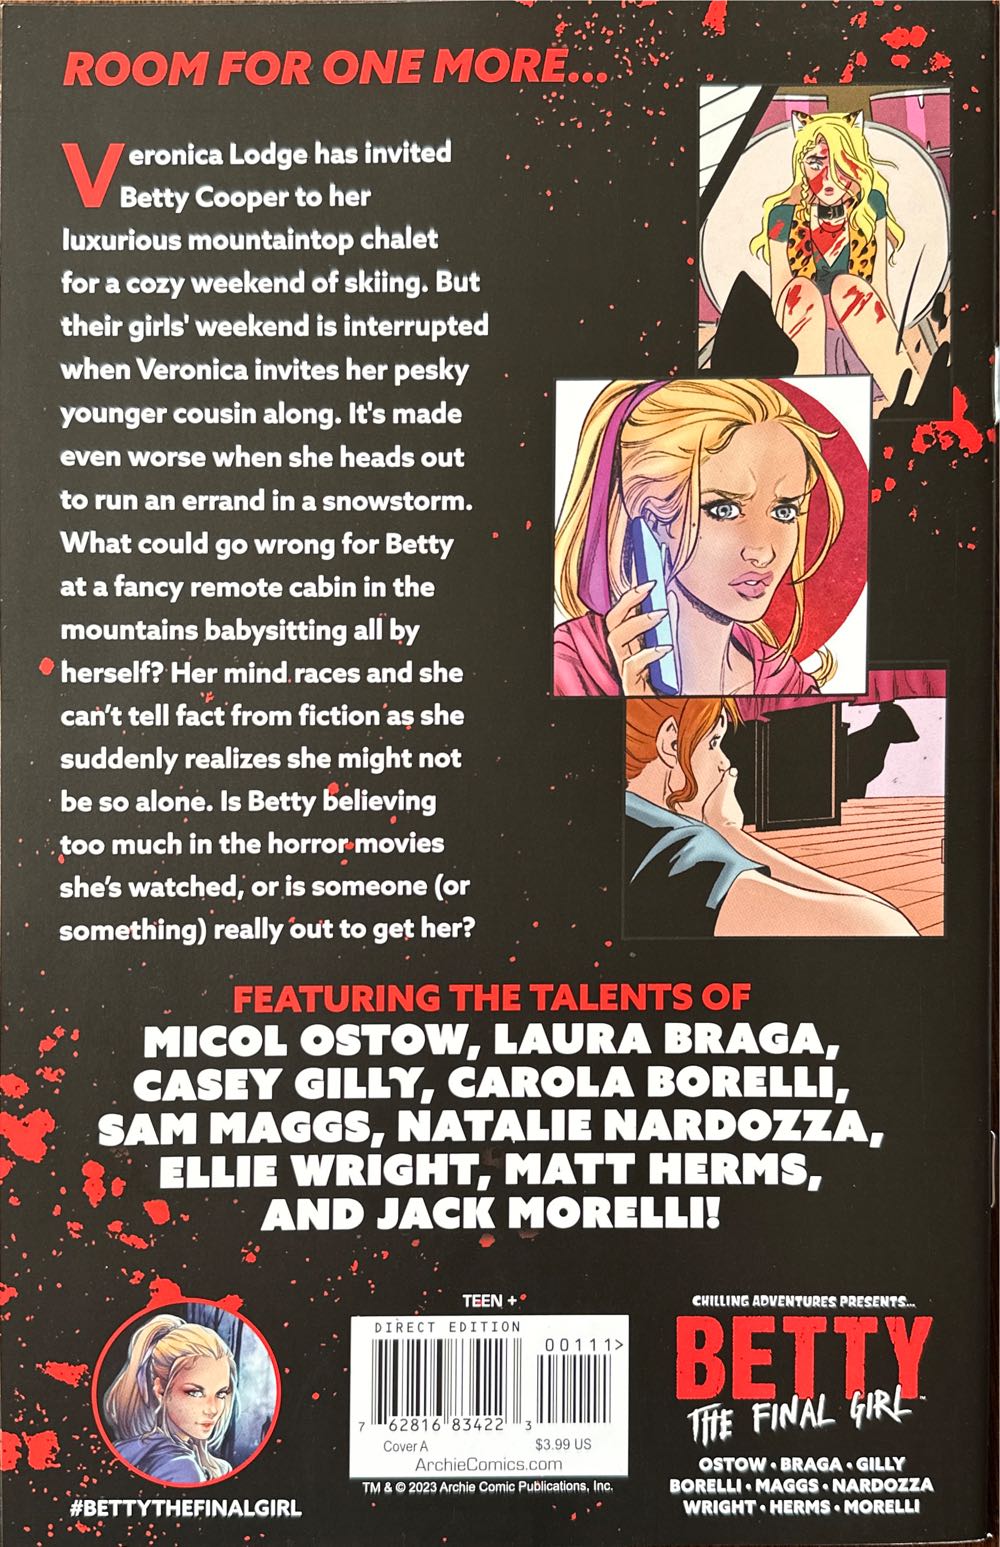 Betty: The Final Girl - Archie Comic Publication, Inc. (1 - Feb 2023) comic book collectible [Barcode 76281683422300111] - Main Image 2